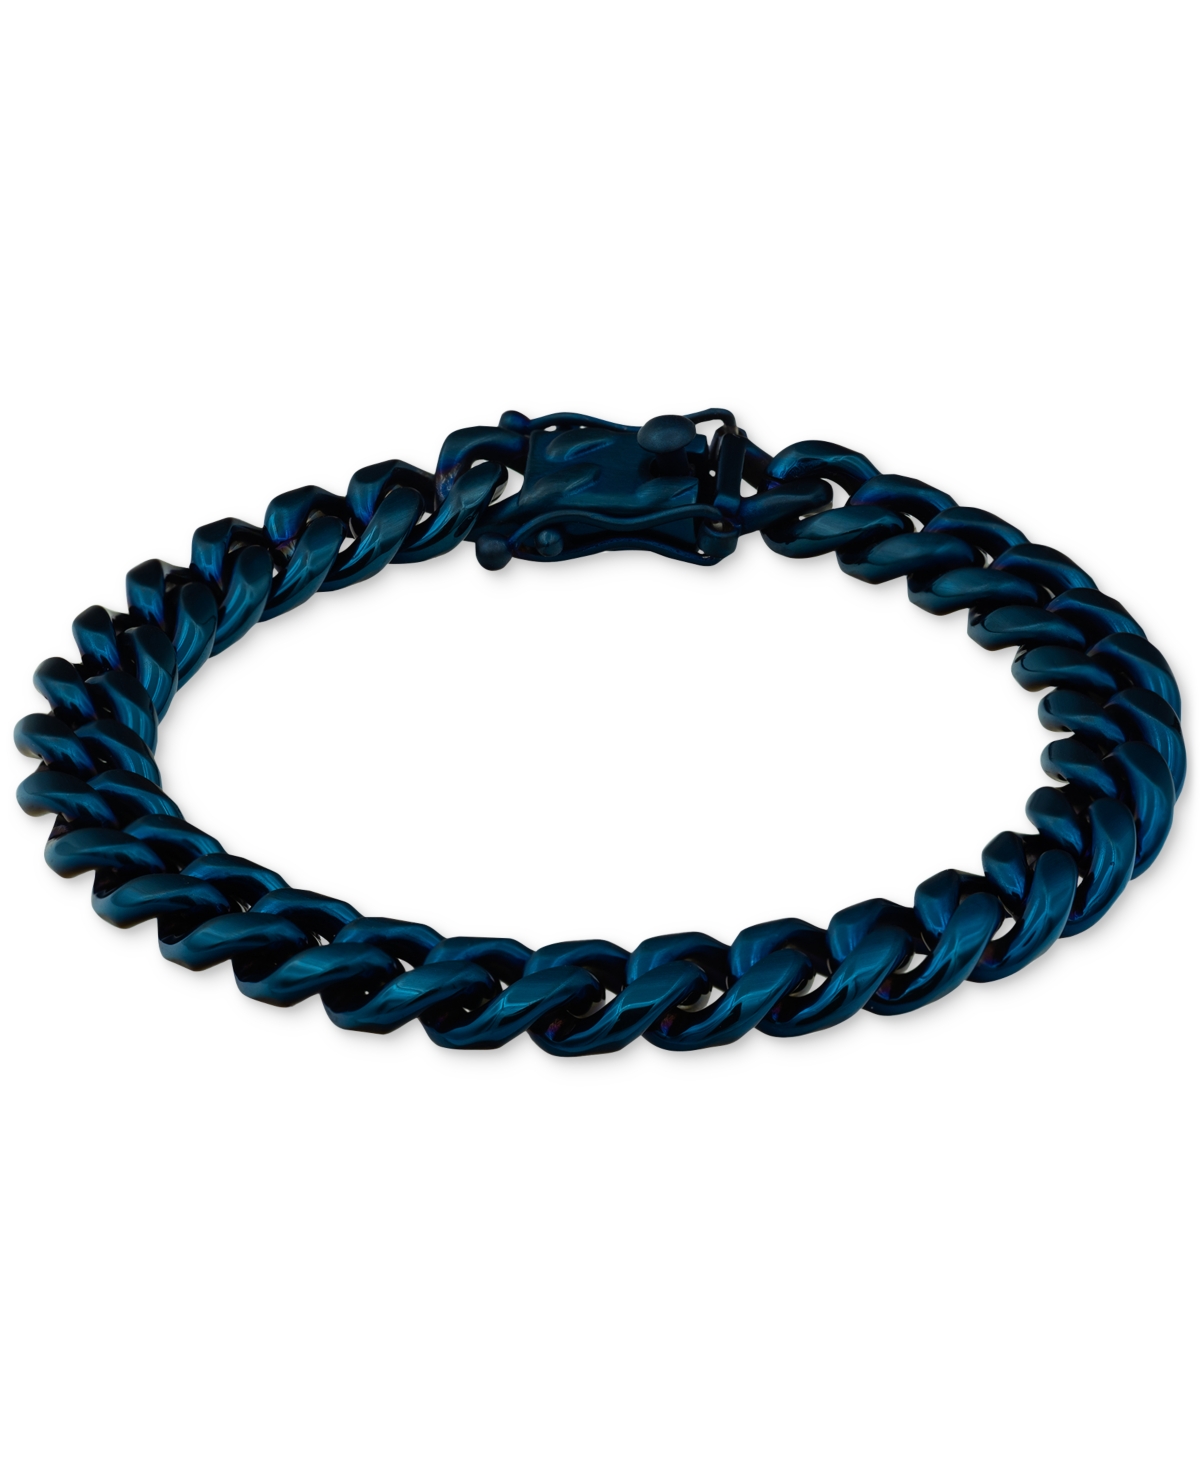 Men's Miami Cuban Link Chain Bracelet in Blue Ion-Plated Stainless Steel - Blue